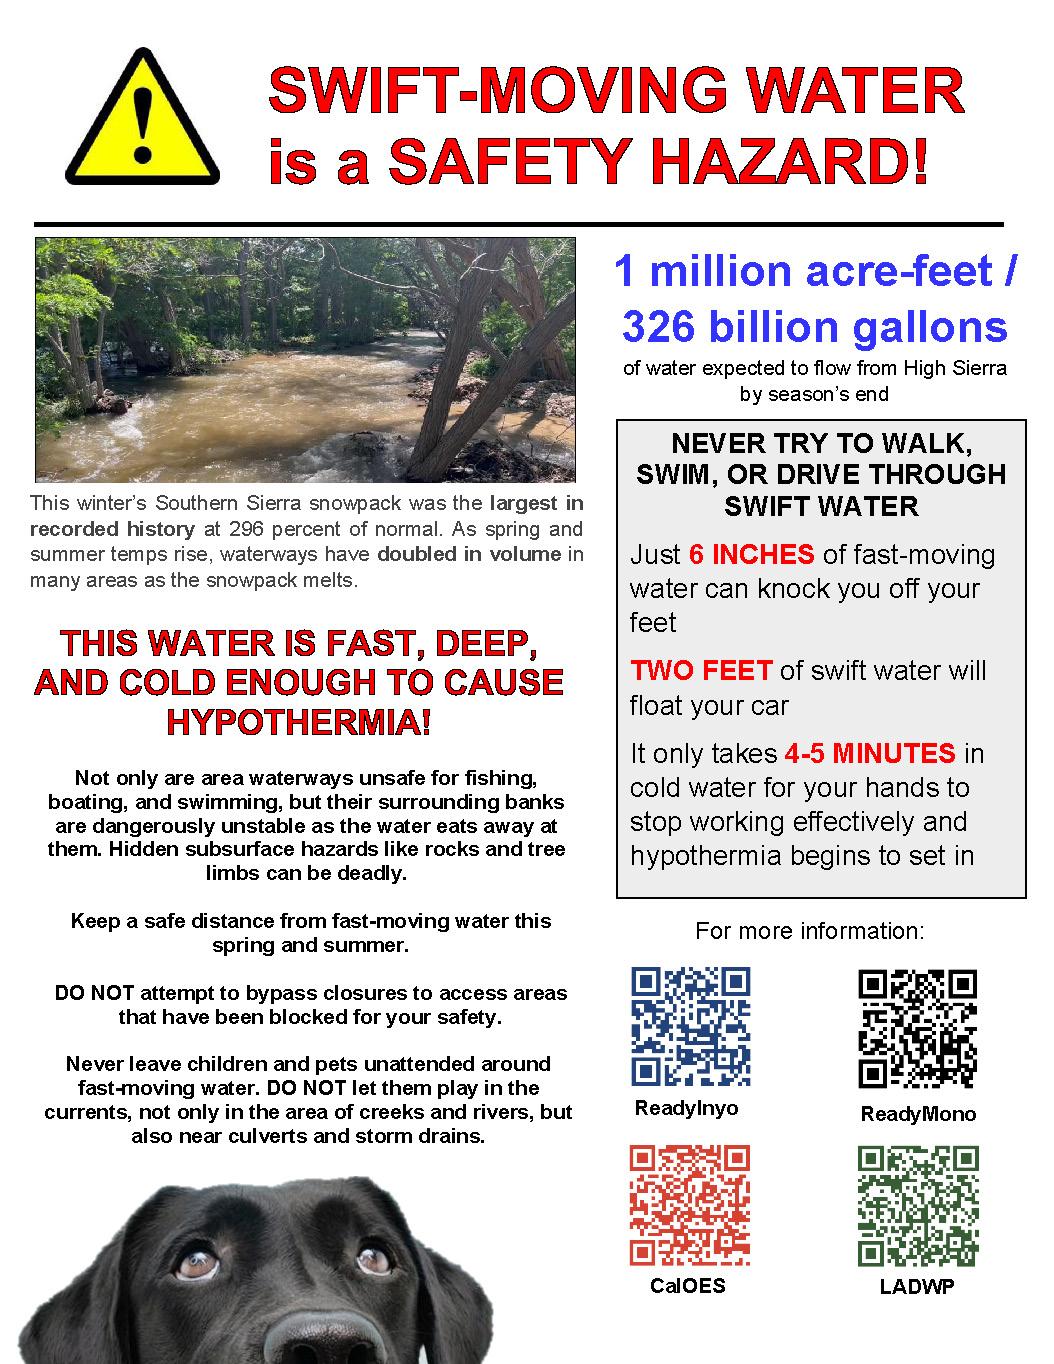 In color image showing a public service announcement flyer describing the hazards associated with swift cold moving water.